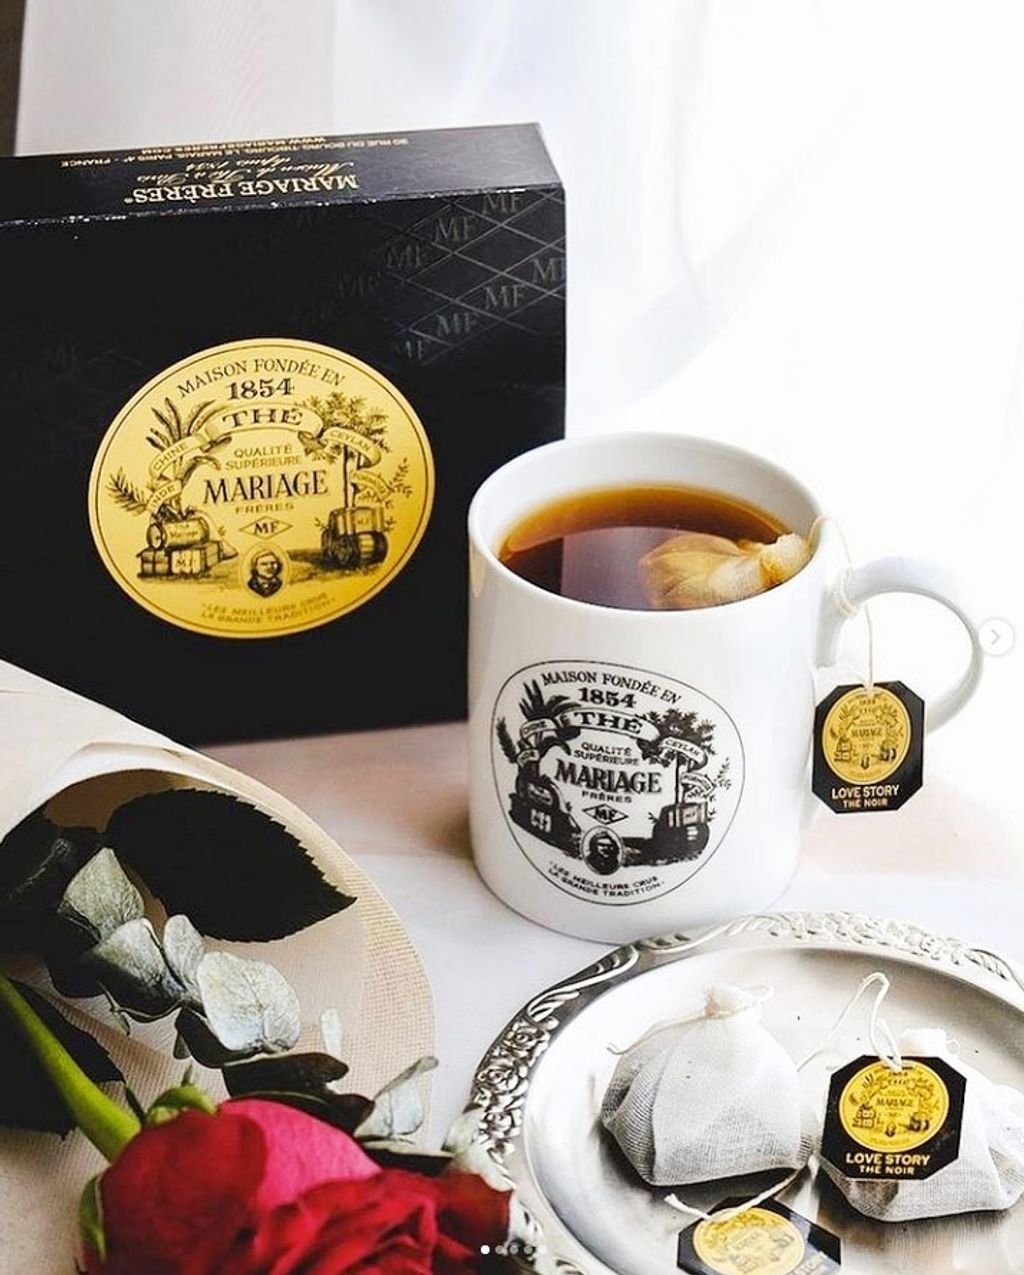 French Breakfast tea by Mariage Freres -Box of 30 tea bags